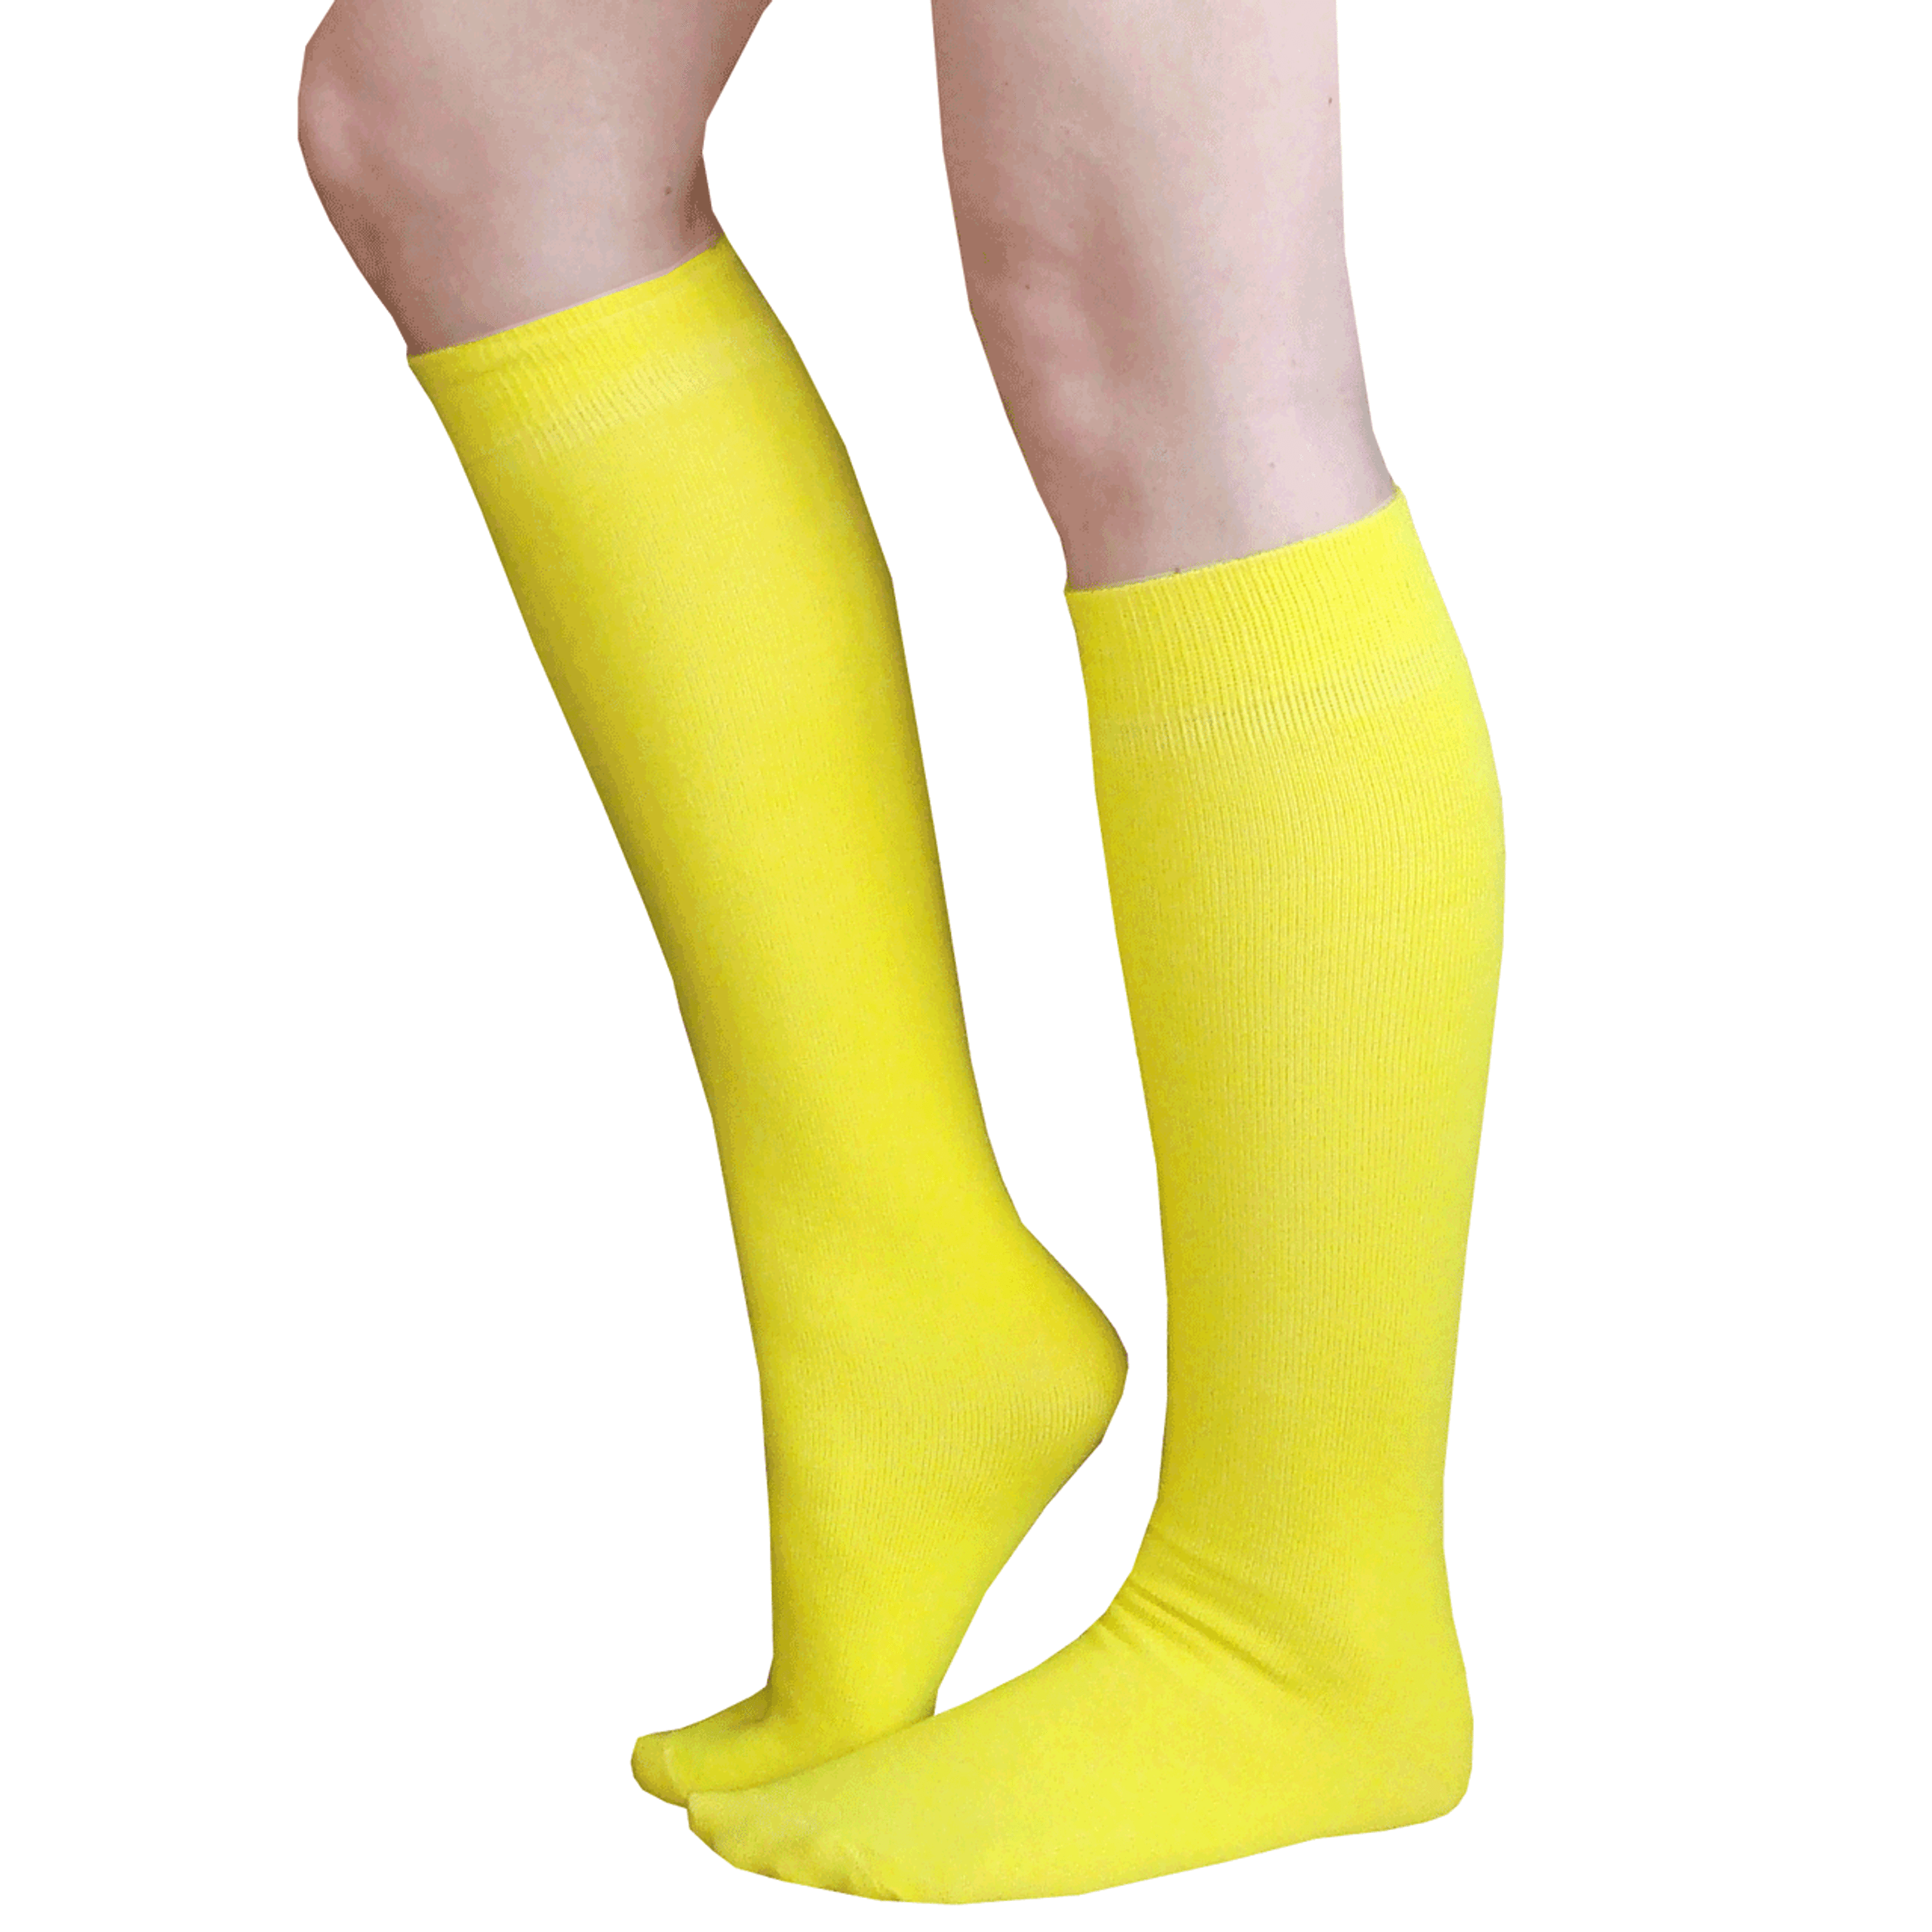 Thin Solid Yellow Knee Highs